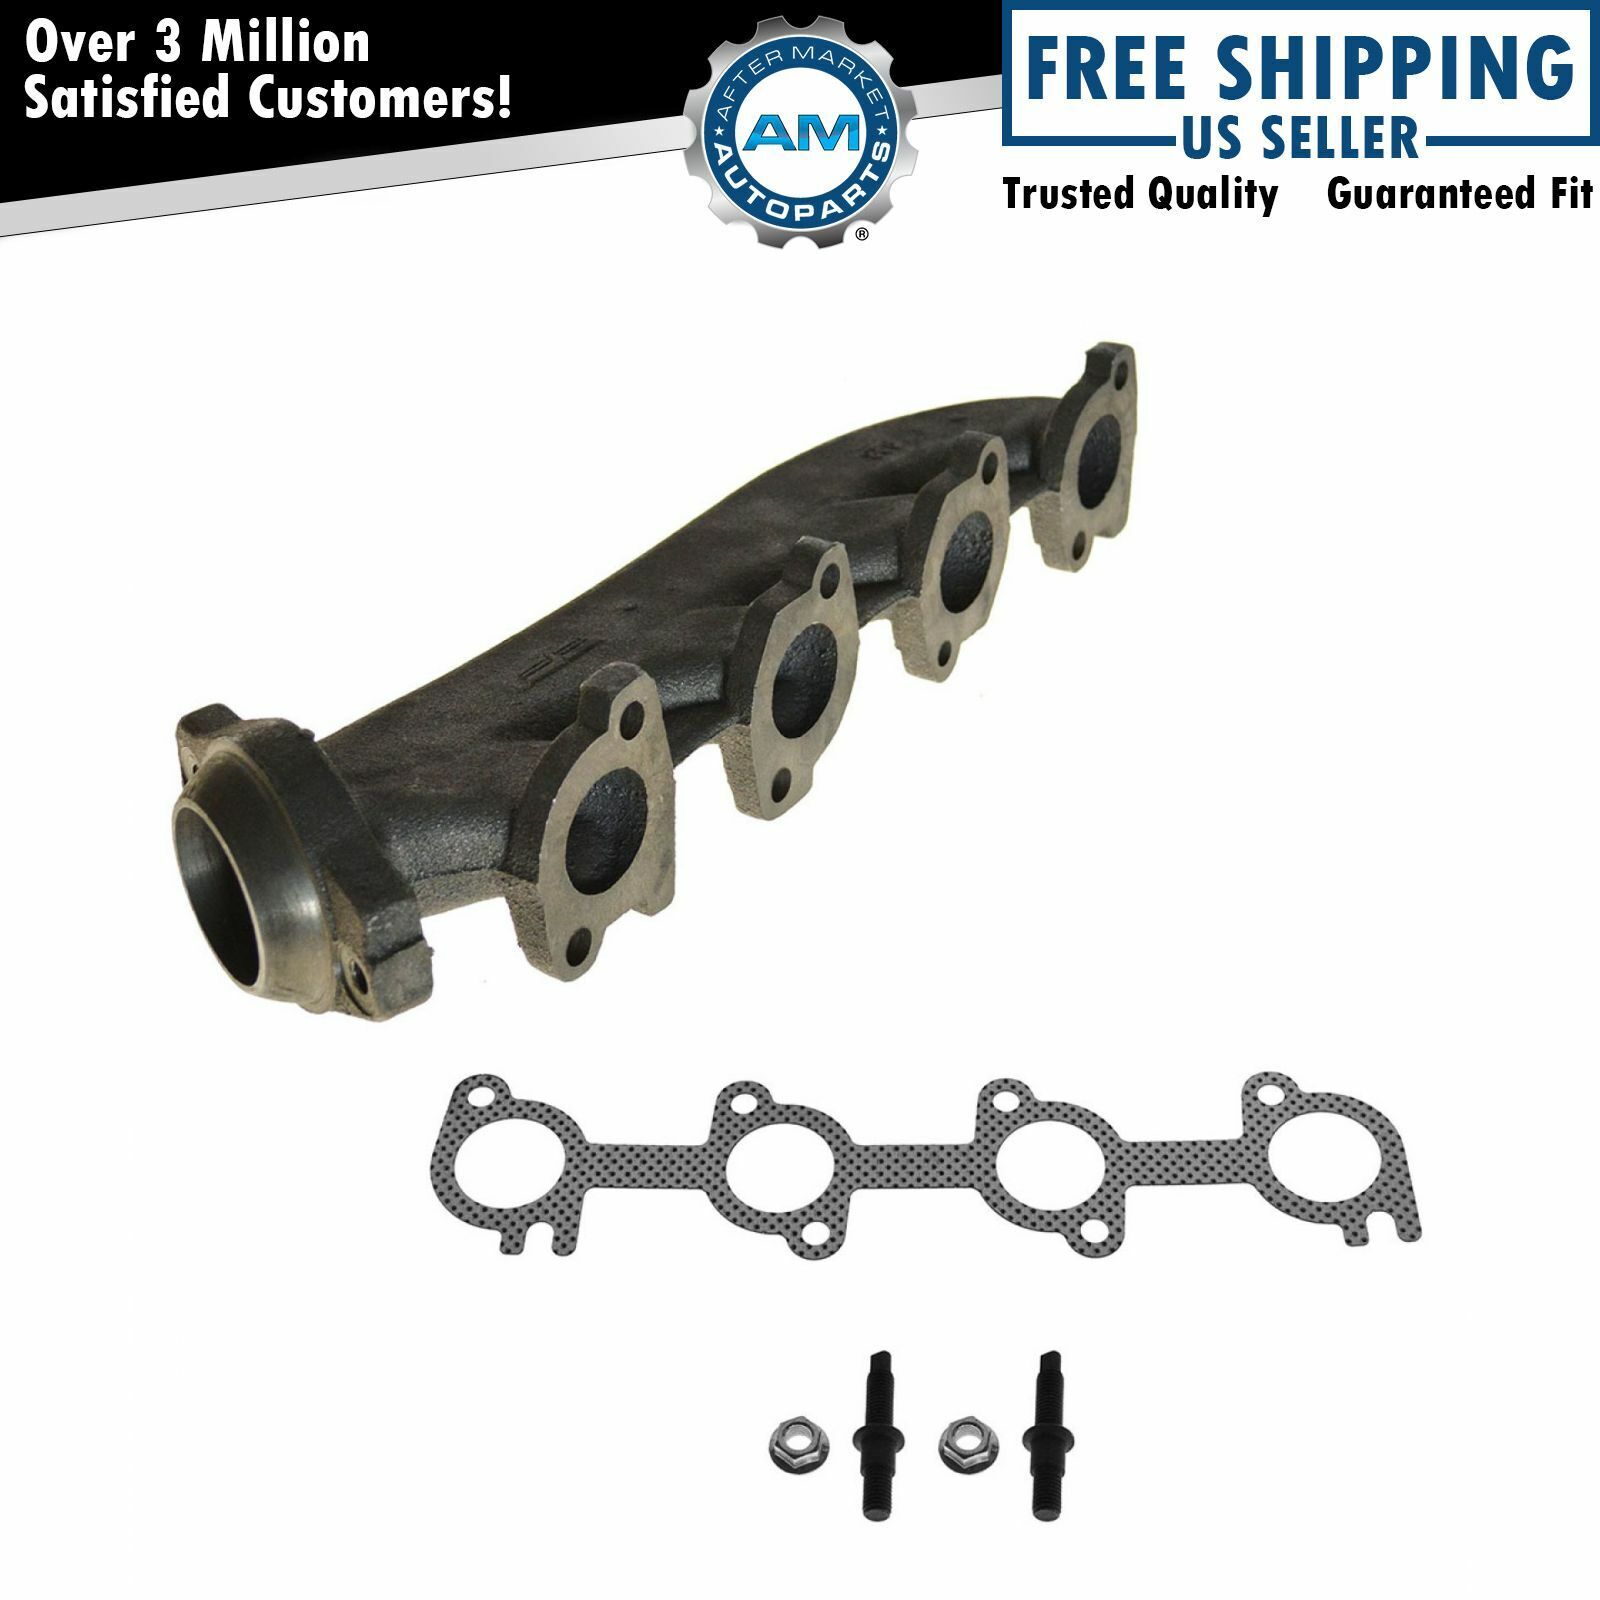 Dorman Exhaust Manifold w/ Gasket & Hardware Kit for Crown Vic Marquis Town Car